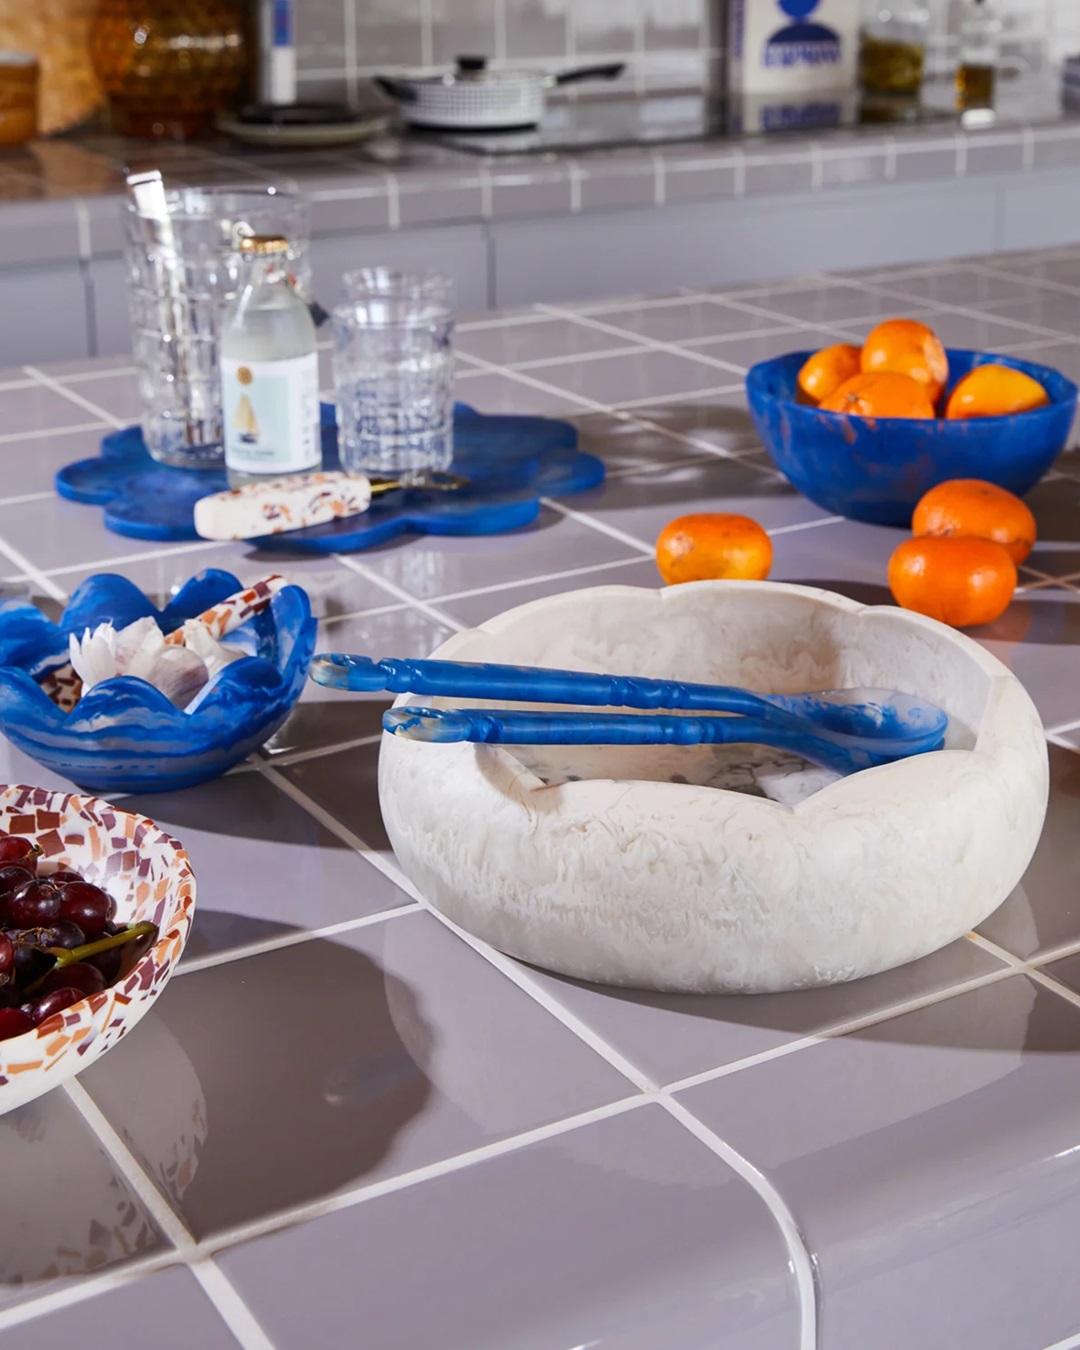 Blue resin salad servers in bowl on kitchen bench